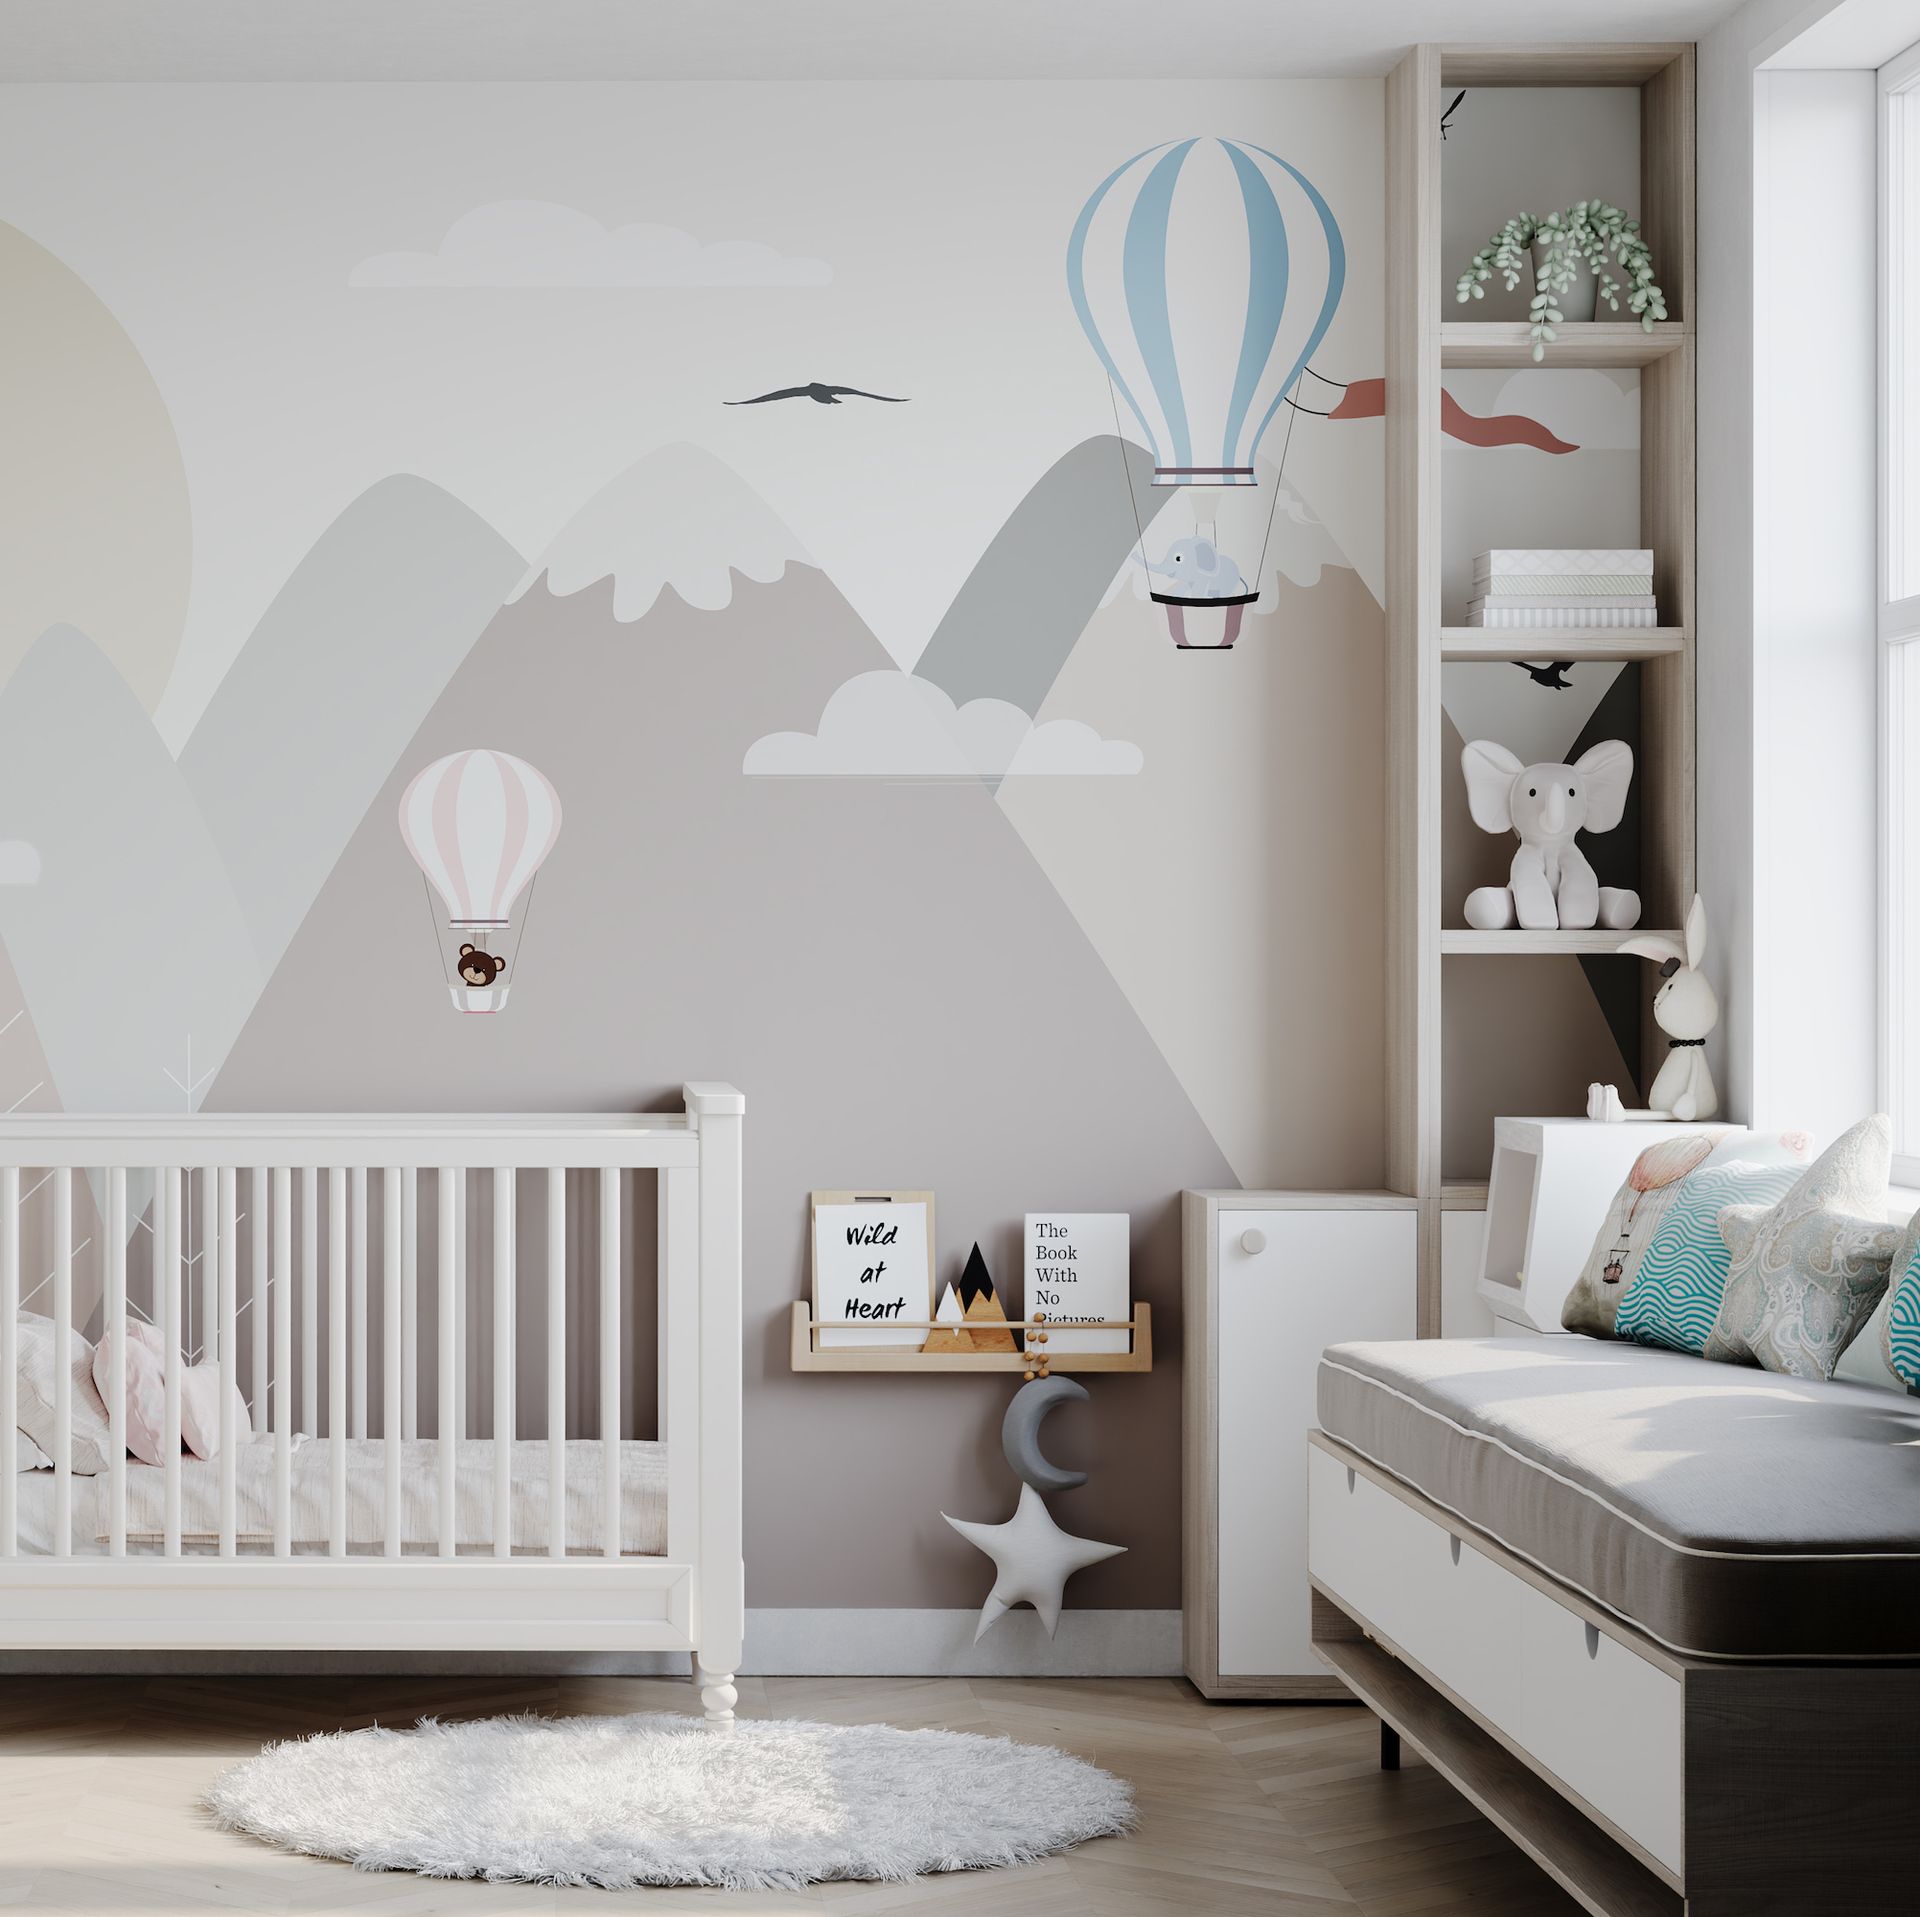 <p>                     If you've gone for a gorgeous wall mural you'll want to be able to see it, without cluttering the nursery with too much furniture. So opt for clever toy storage and other storage solutions, such as a seating and storage unit that's combined.                   </p>                                      <p>                     A sturdy piece, like the one here, gives you somewhere to sit and nurse your baby, with space to store blankets, and other bits you need in drawers or shelves below.                   </p>